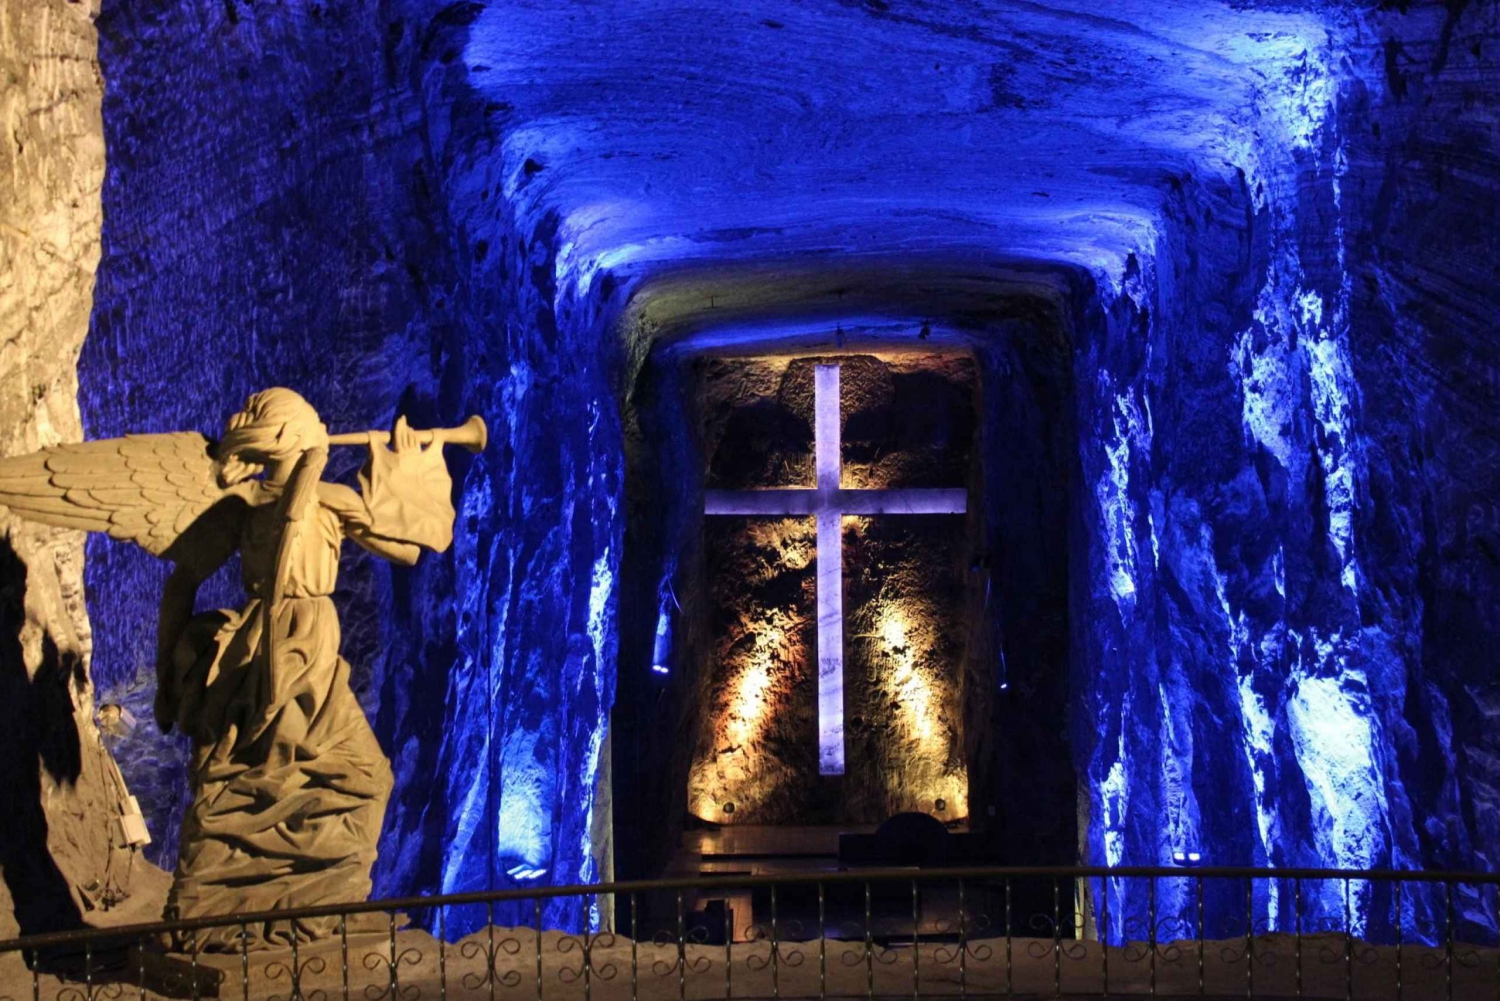 From Bogota: Private tour to Salt Cathedral daily departure